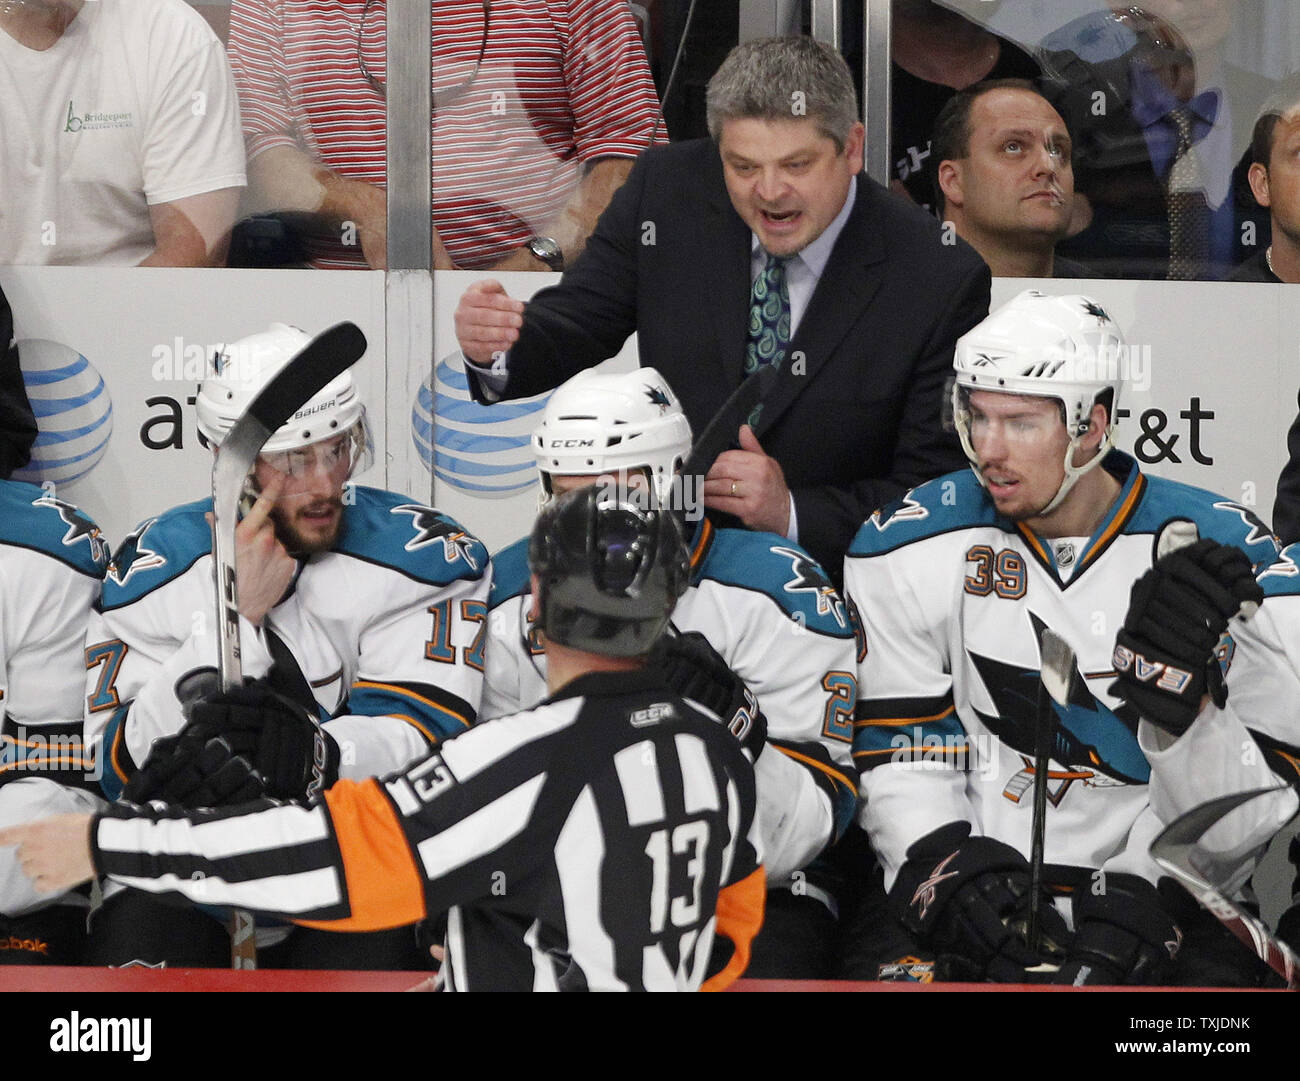 San Jose Sharks head coach Todd McLellan talks to the referee during the first period of game 4 of the NHL Western Conference Finals against the Chicago Blackhawks at the United Center in Chicago on May 23, 2010. The Blackhawks won 4-2, sweeping the Sharks, to advance to the Stanley Cup Finals.     UPI/Brian Kersey Stock Photo